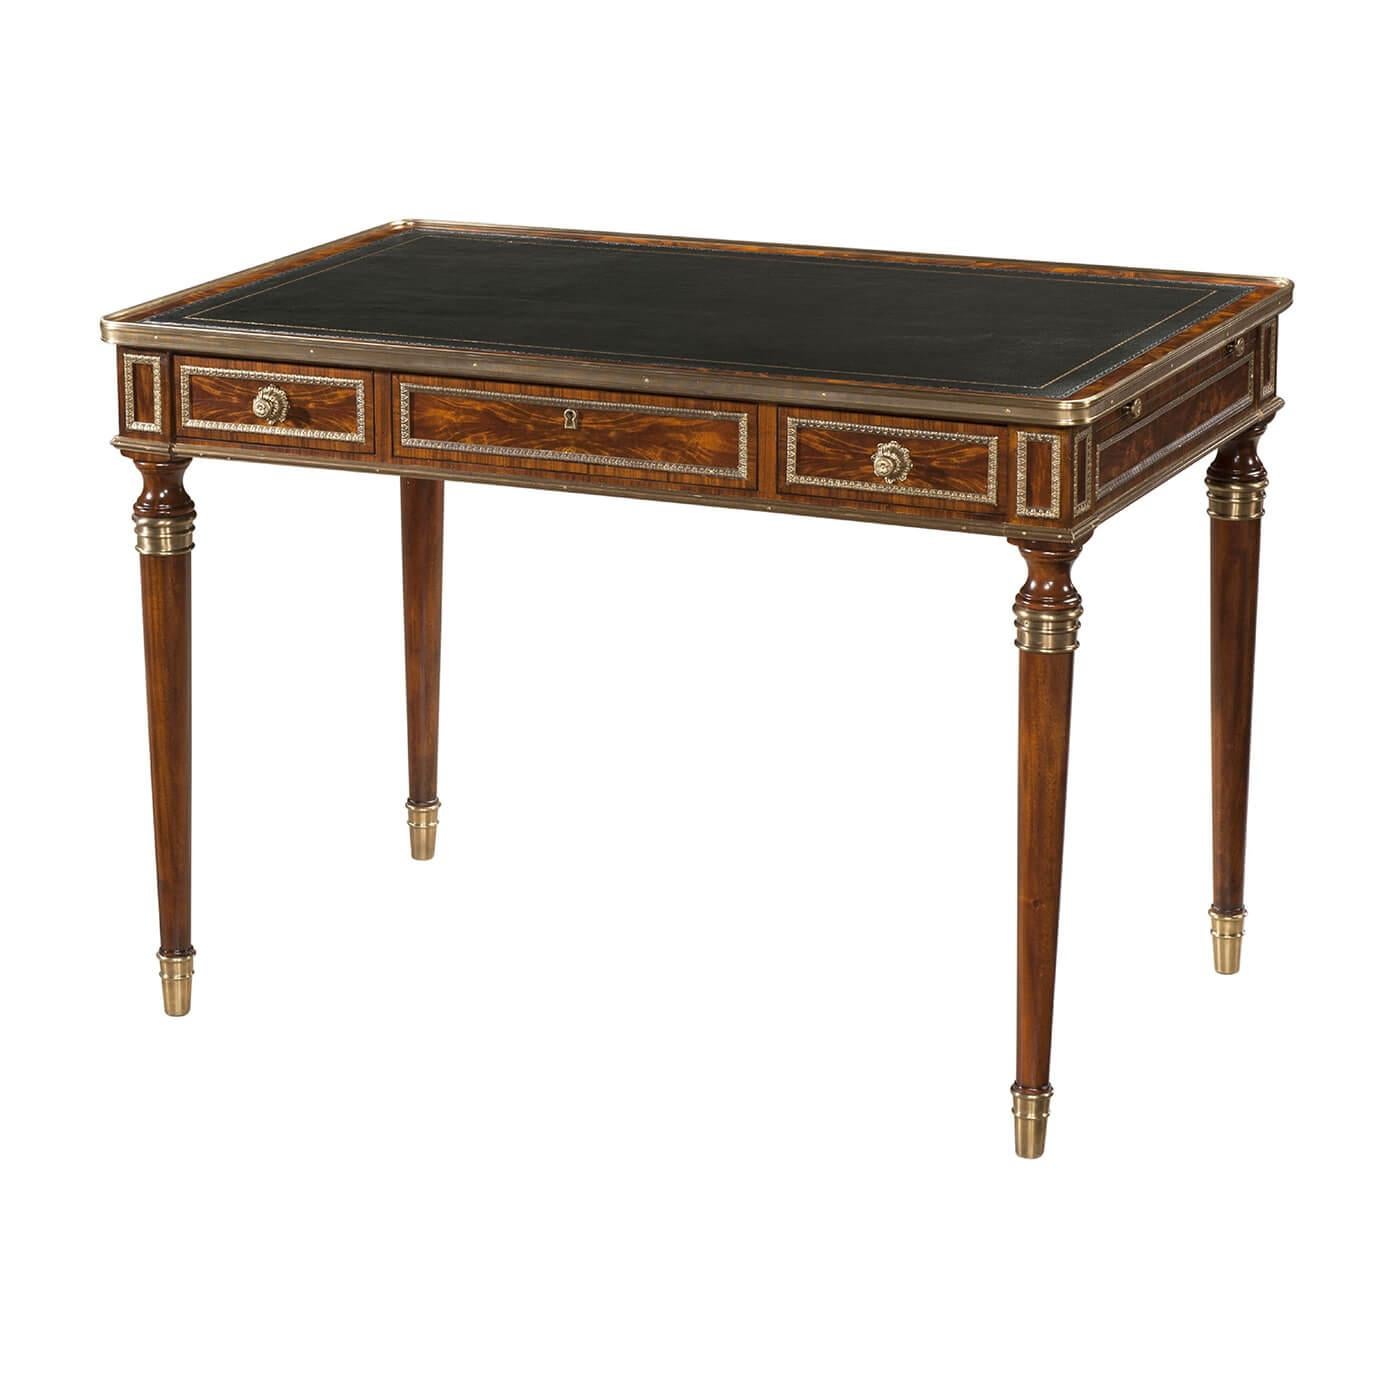 A mahogany and brass mounted bureau plat desk, with a leather inset writing surface and three frieze drawers, on turned legs French. The original Louis XVI.

Dimensions: 42.75